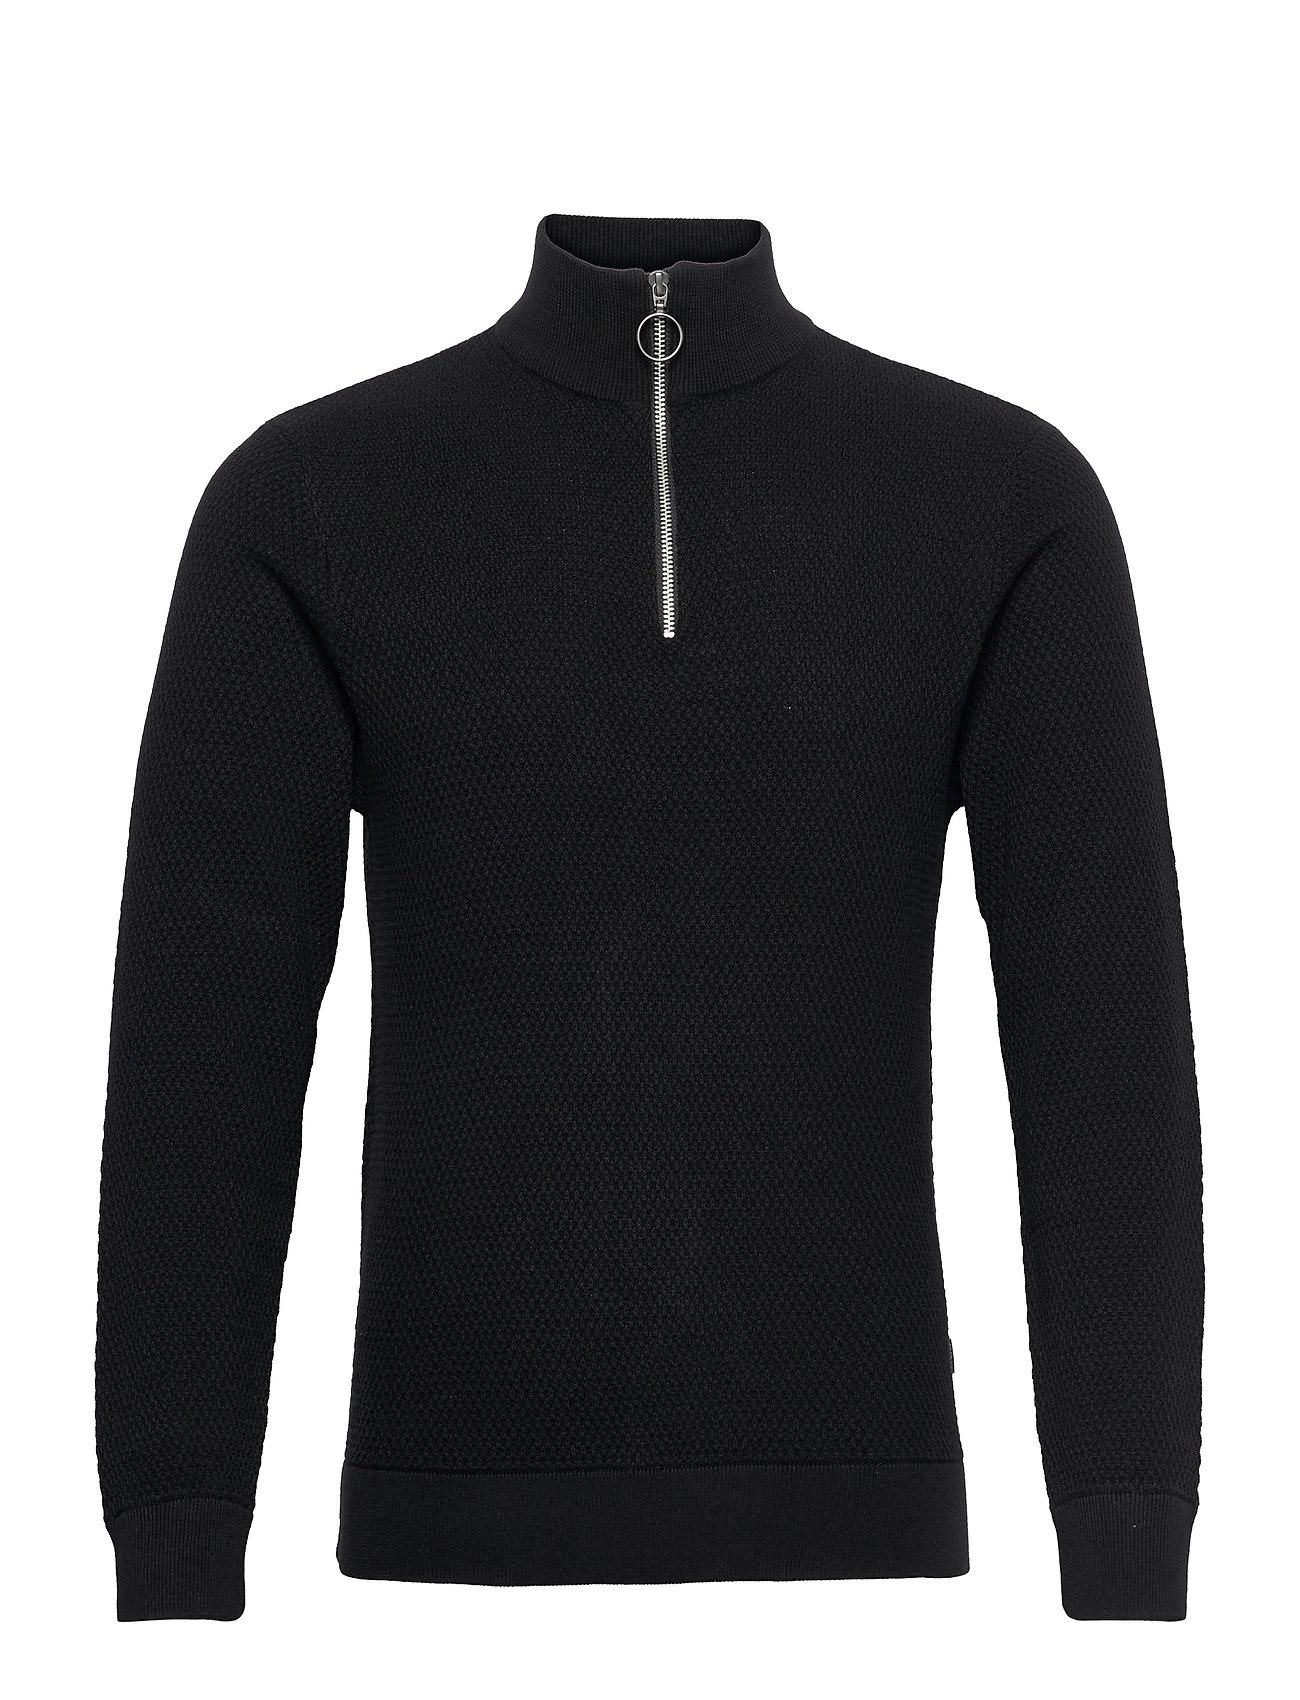 Casual Friday Karlo Structured Zipper Knit Black Casual Friday